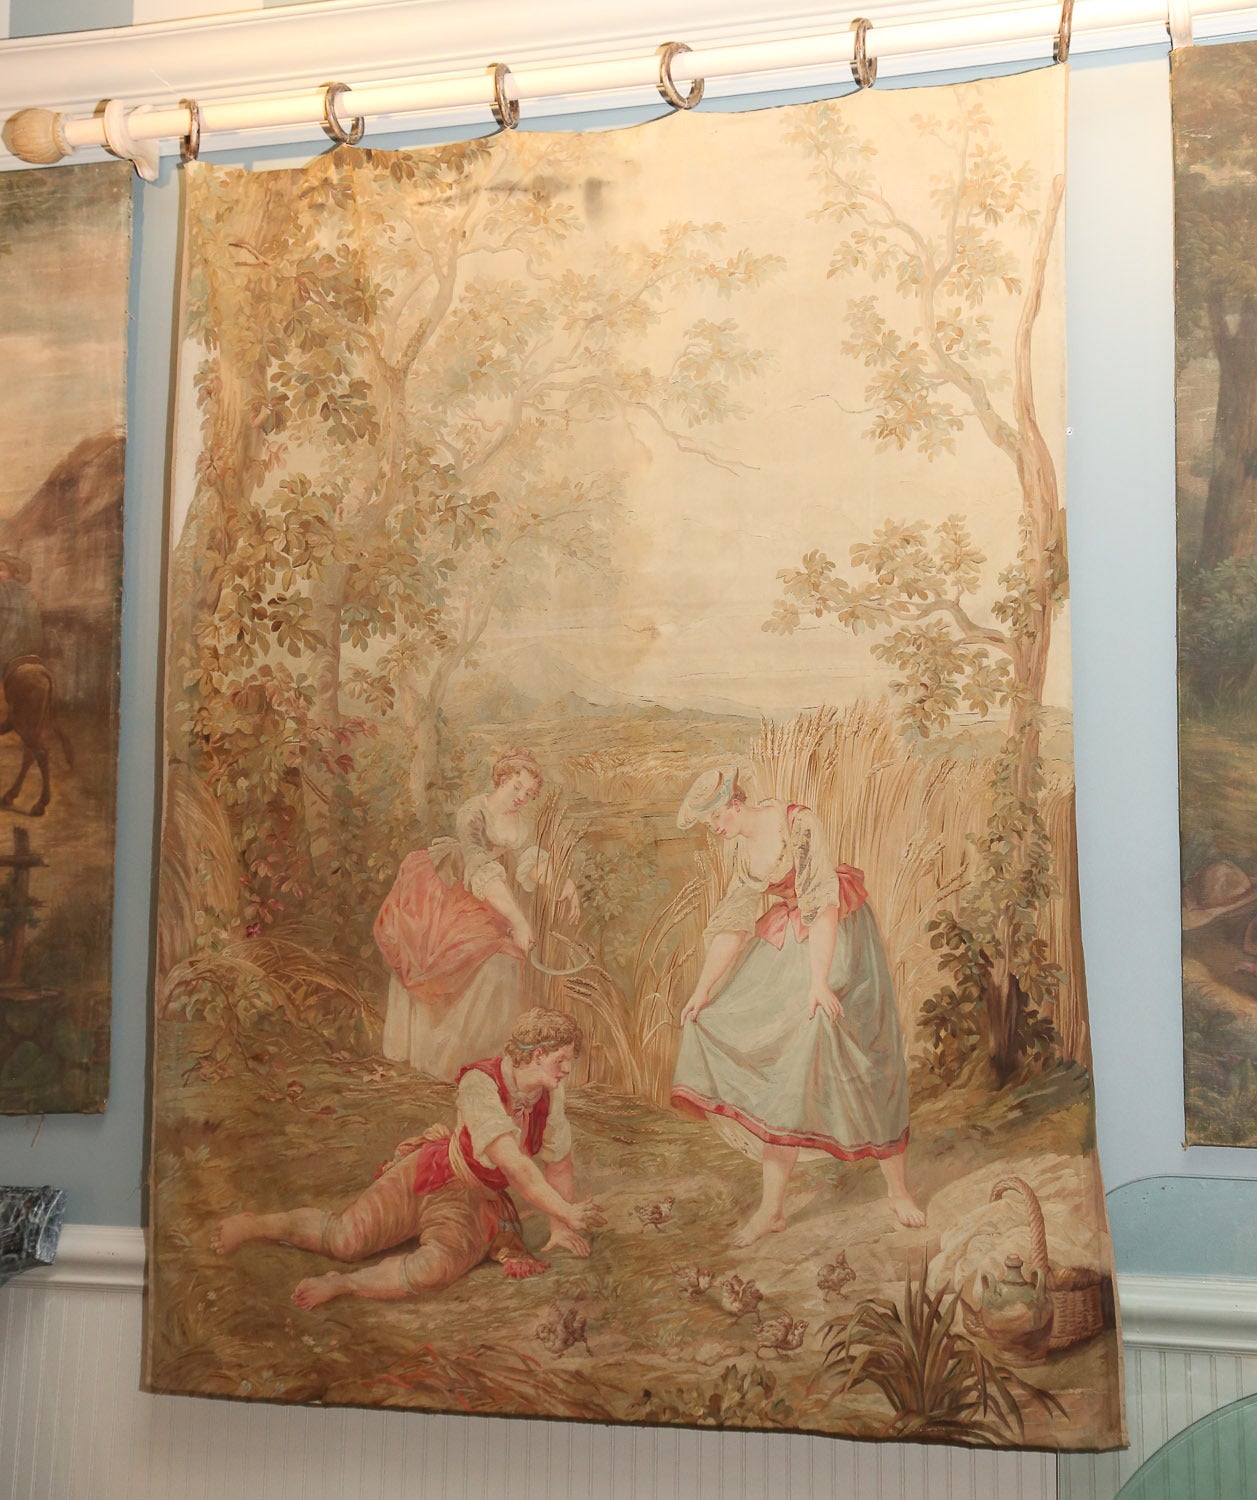 Muted color Aubusson tapestry depicting a pastoral scene with figures gathering from
nature. Soft peaches, blues and neutrals are ideal for today's interiors.